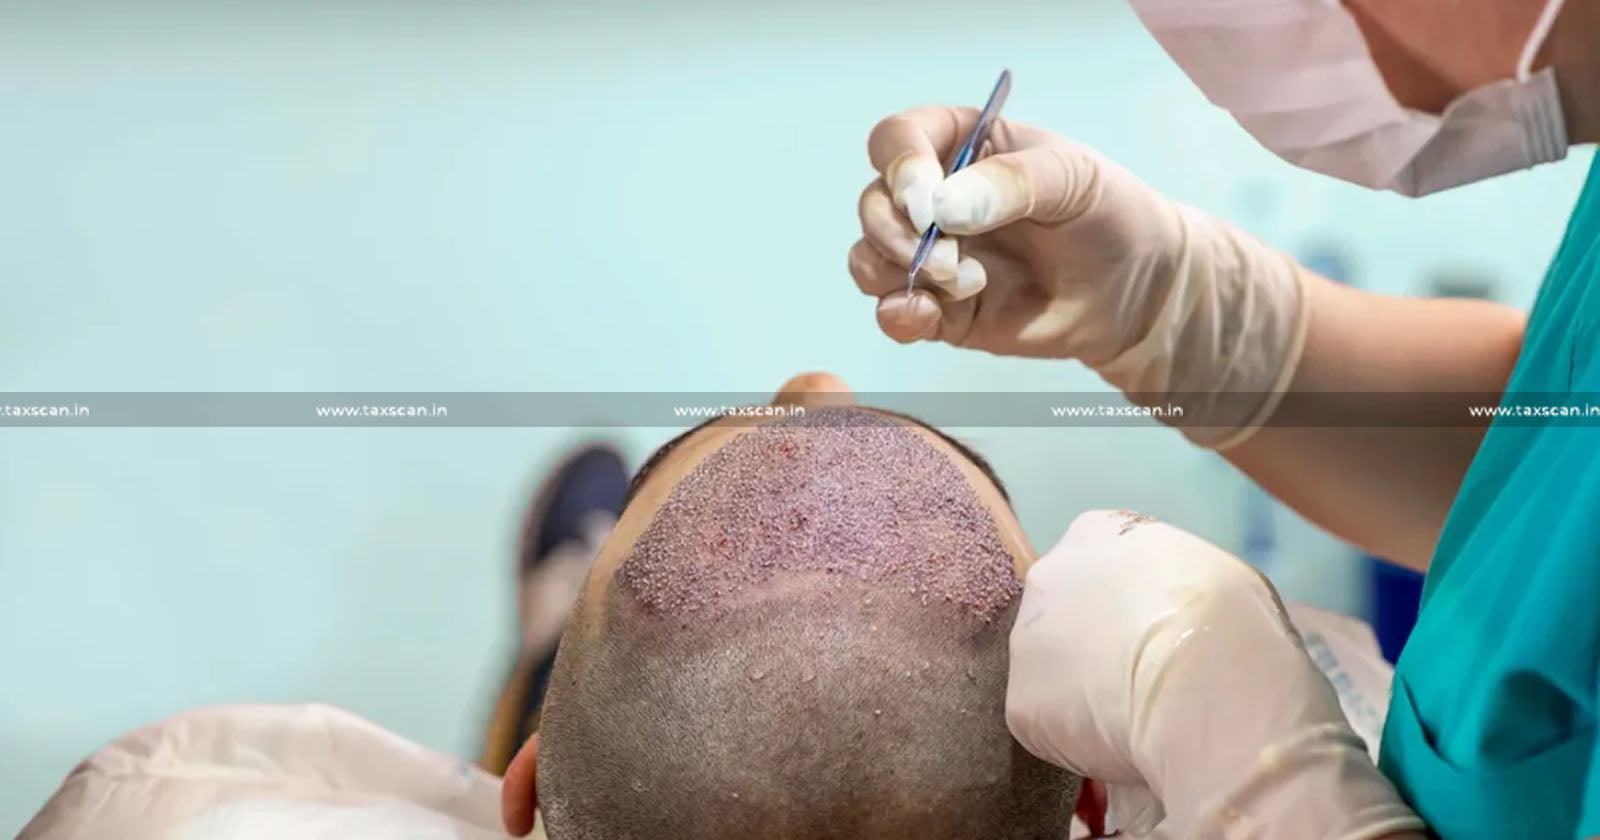 Hair Transplant - Cosmetic Surgery - Service Tax - CESTAT - Customs - Excise - Taxscan